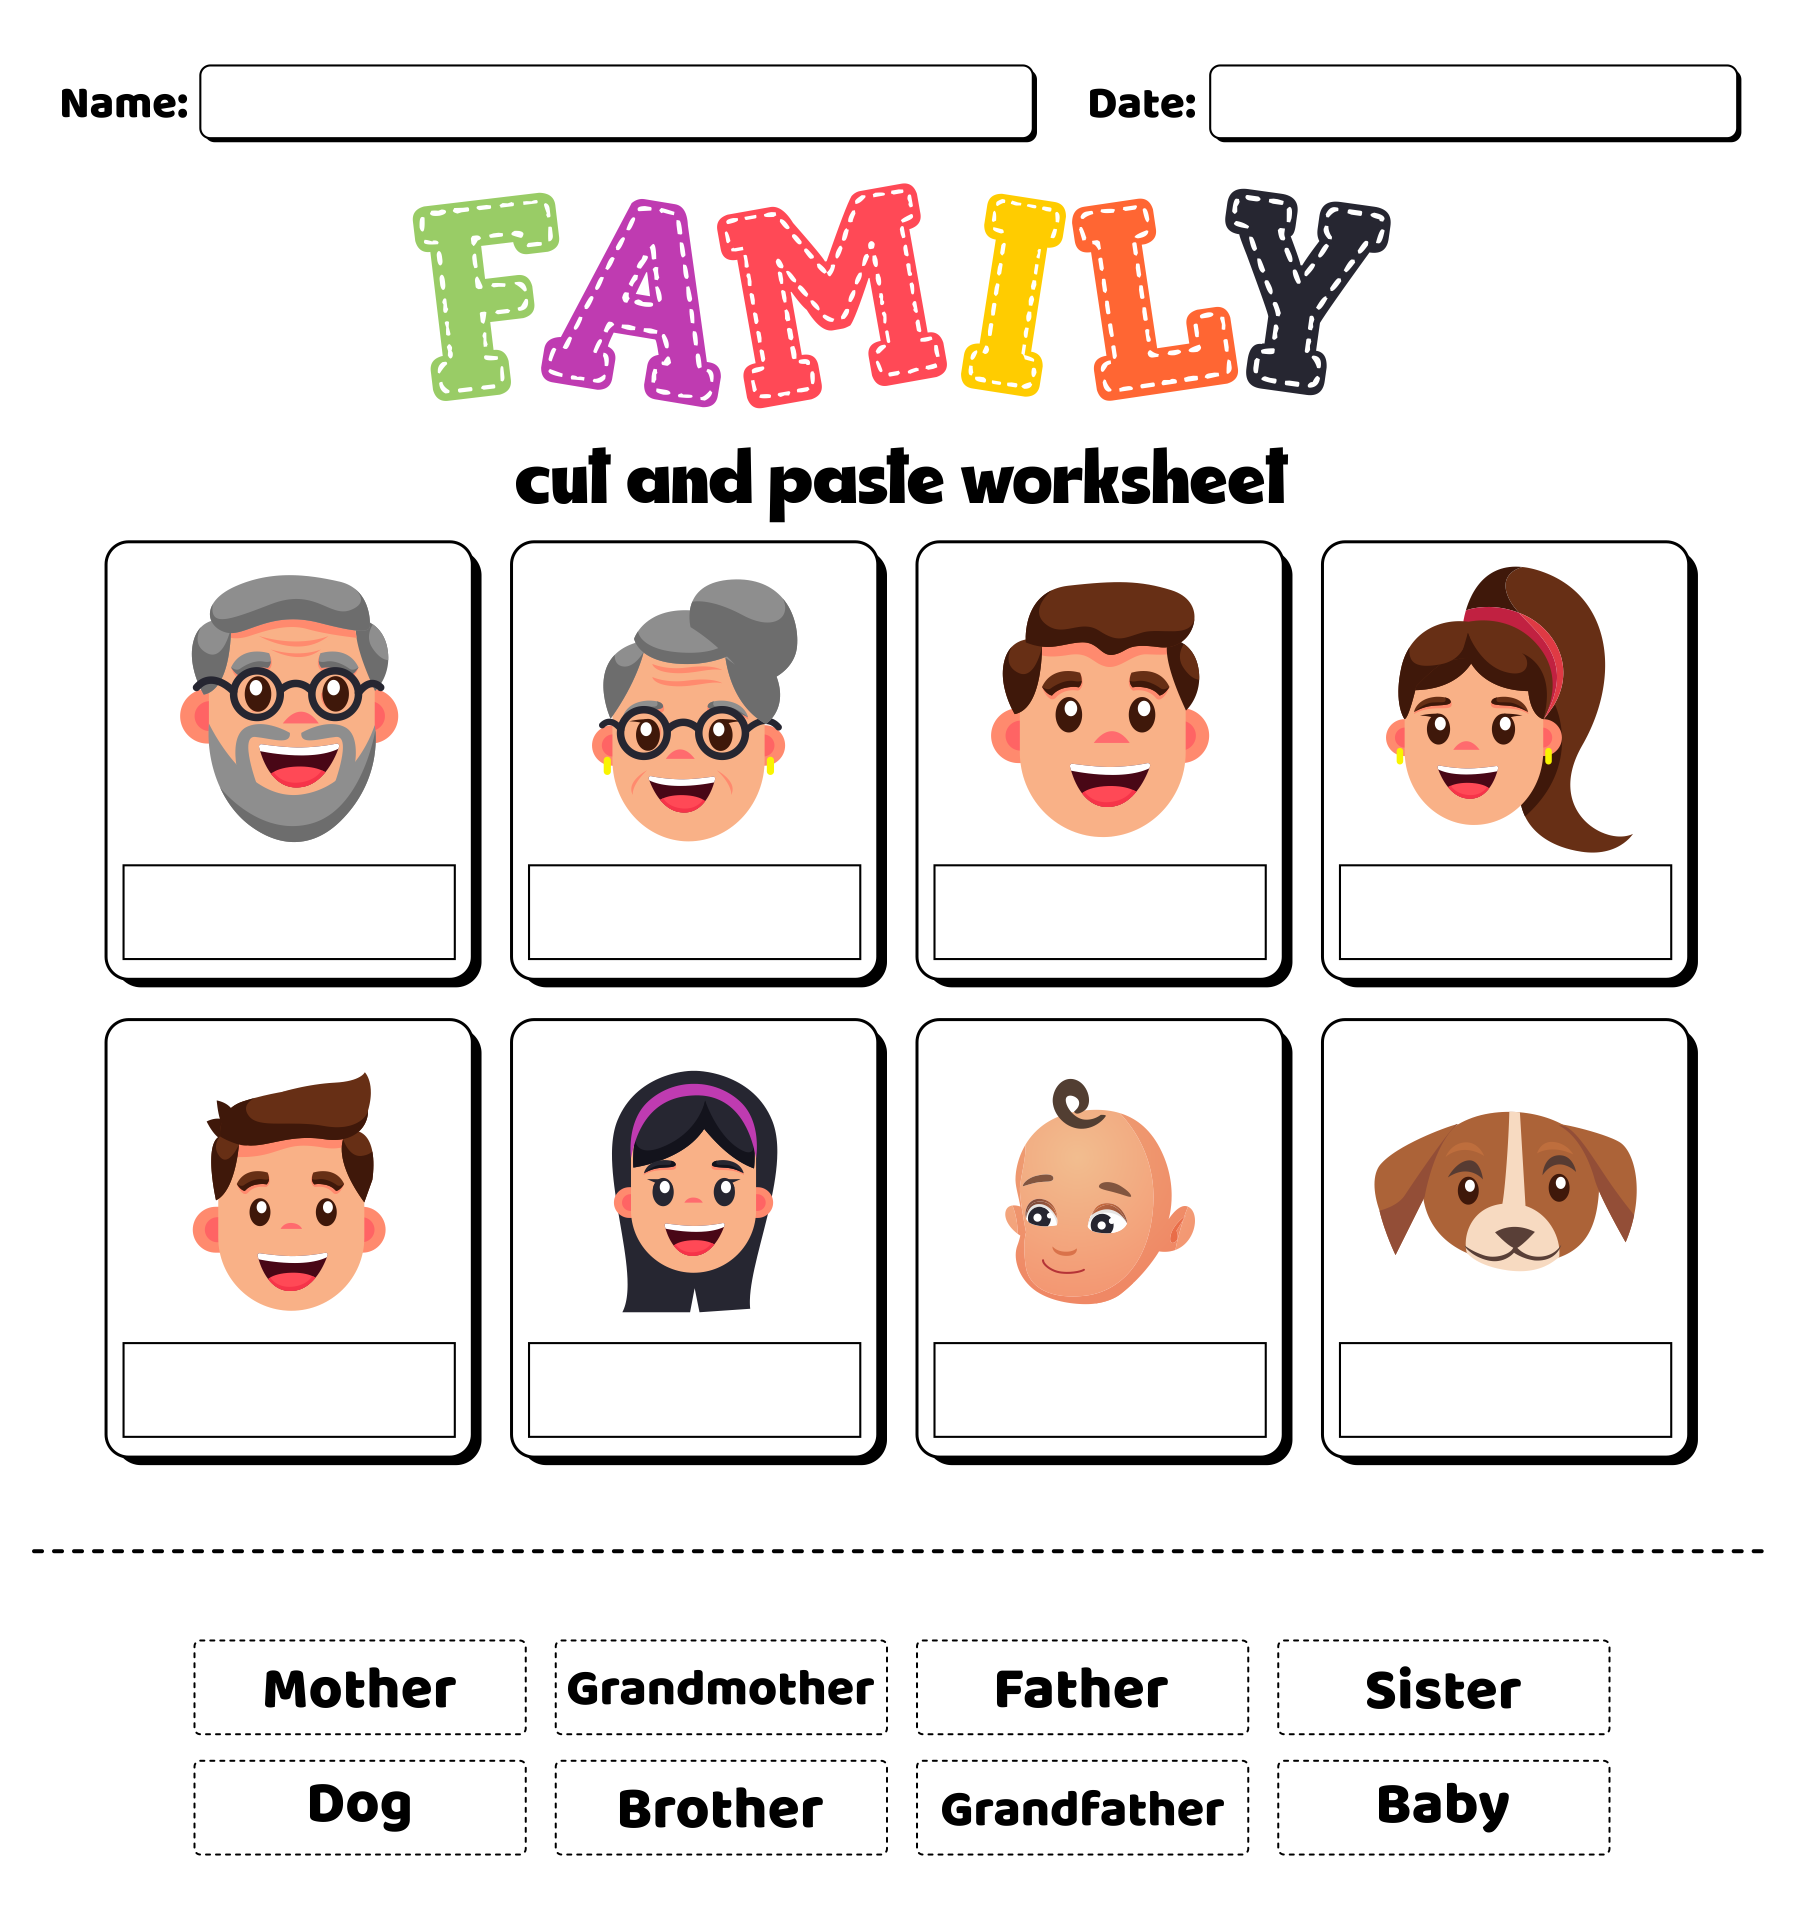 Family Cut and Paste Worksheet